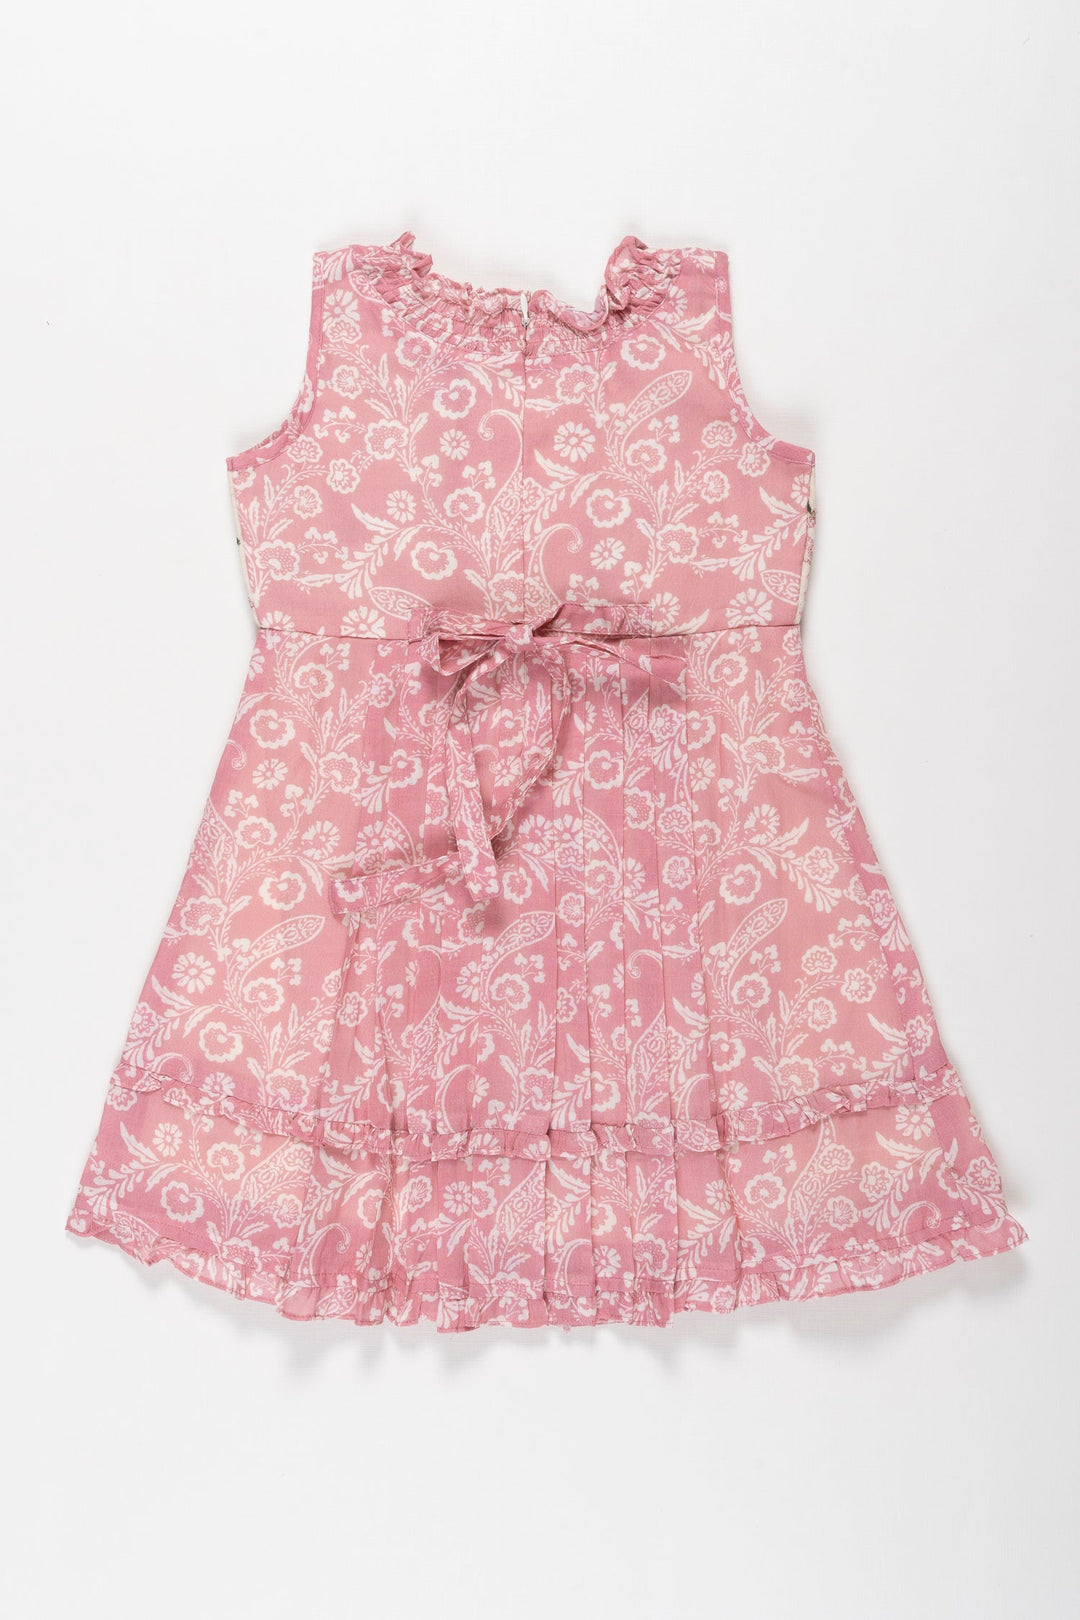 The Nesavu Girls Cotton Frock Charming Petal: Girls Pink Paisley Cotton Frock with Embroidery Detail Nesavu Buy Pink Paisley Embroidered Cotton Frock for Girls | Everyday Elegance | The Nesavu